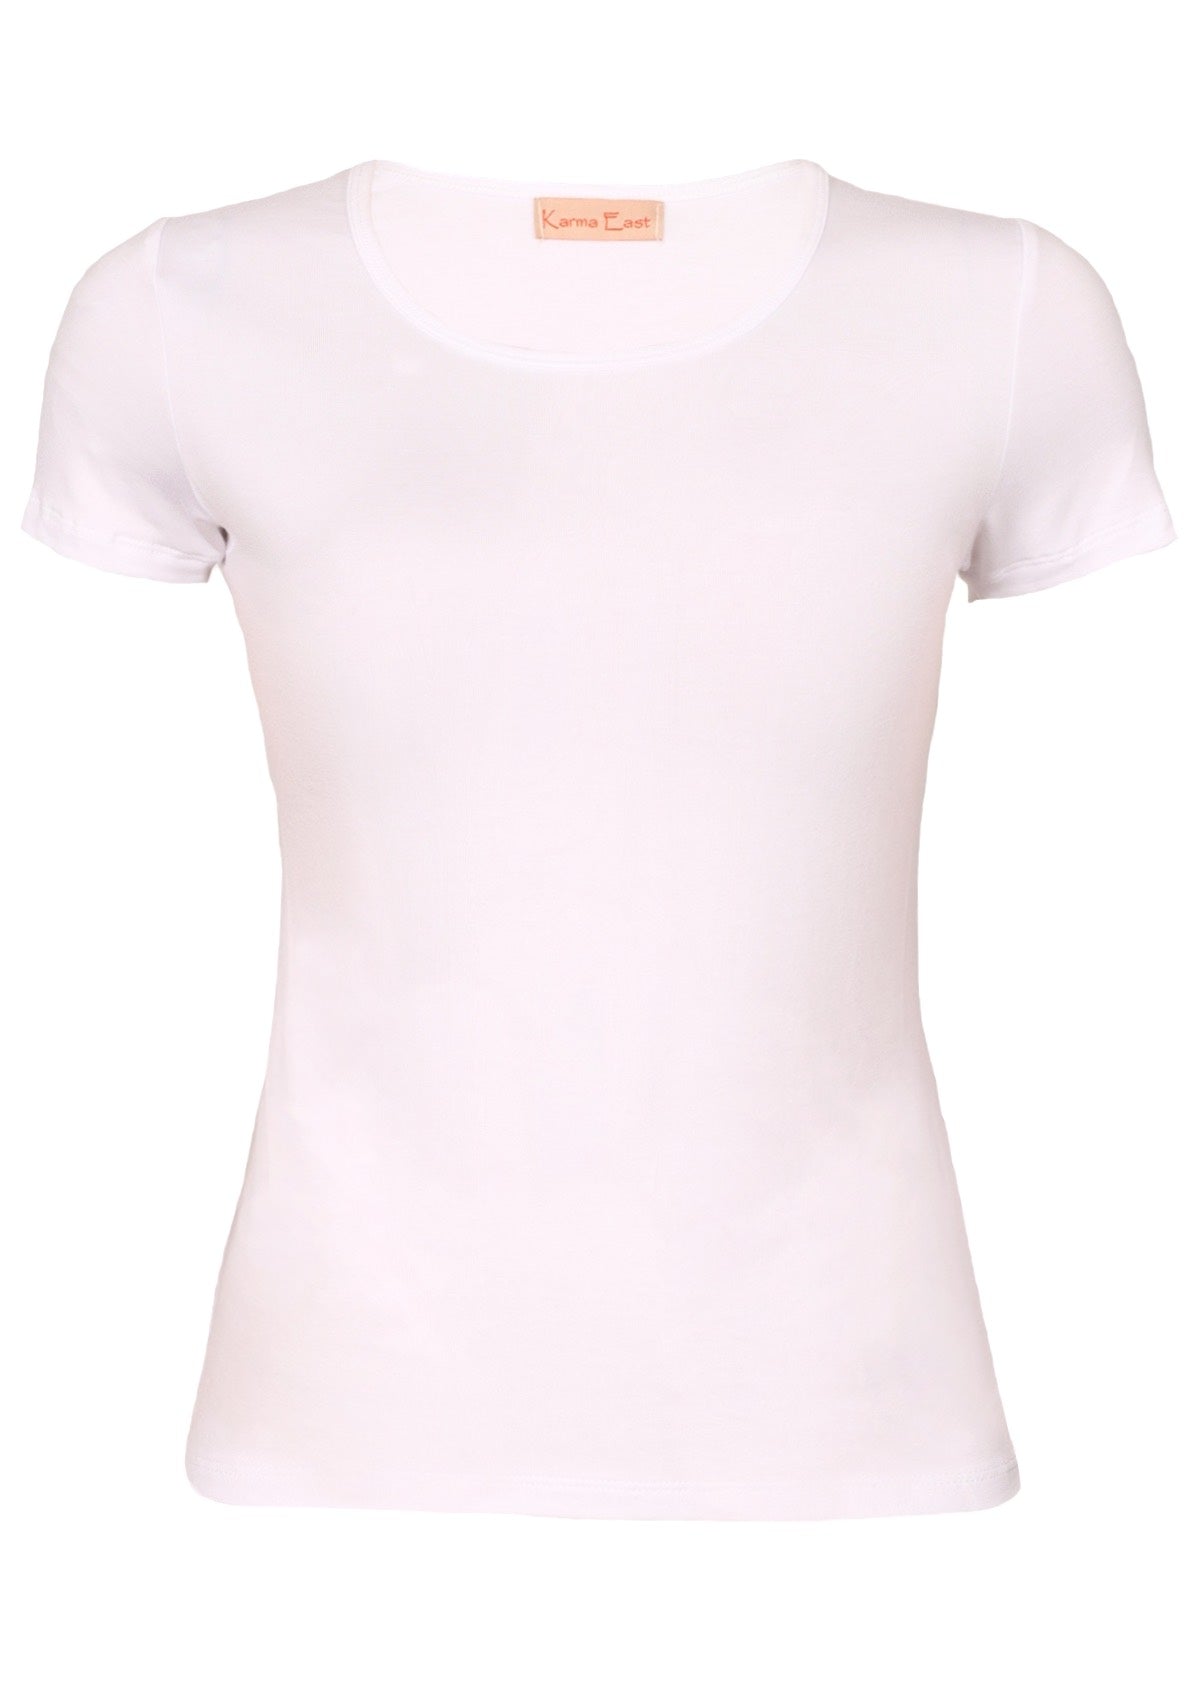 Front view basic short sleeve white rayon women's t-shirt.